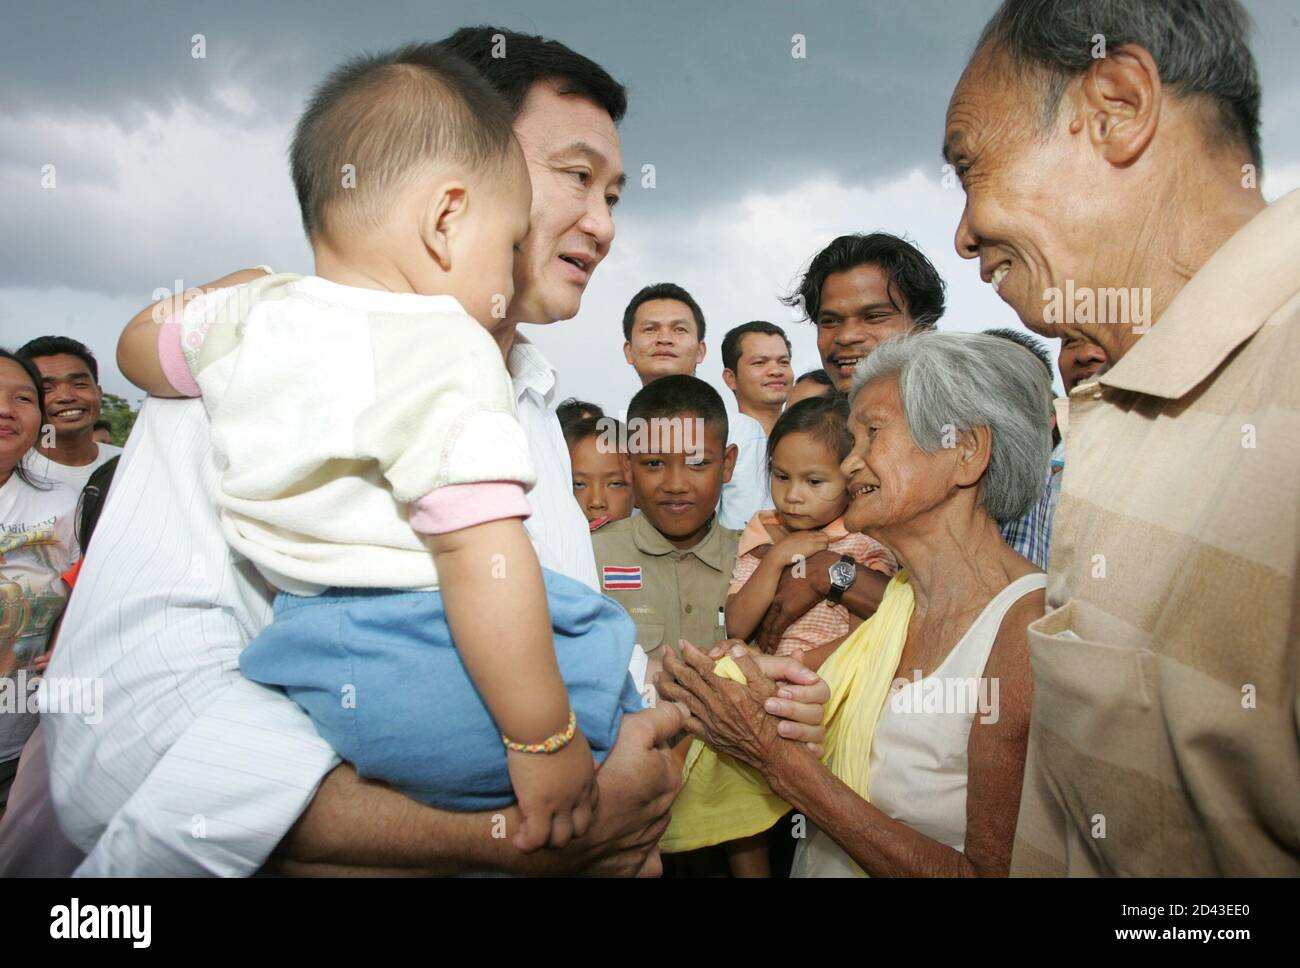 Thai Prime Minister Thaksin Shinawatra carries a child as he meets villagers in Yala province, 1,200 km (750 miles) south of Bangkok, on February 16, 2005. Thaksin arrived in the largely Muslim south on Wednesday with a stern message for villagers tempted to help separatist militants.  SS/LA Stock Photo